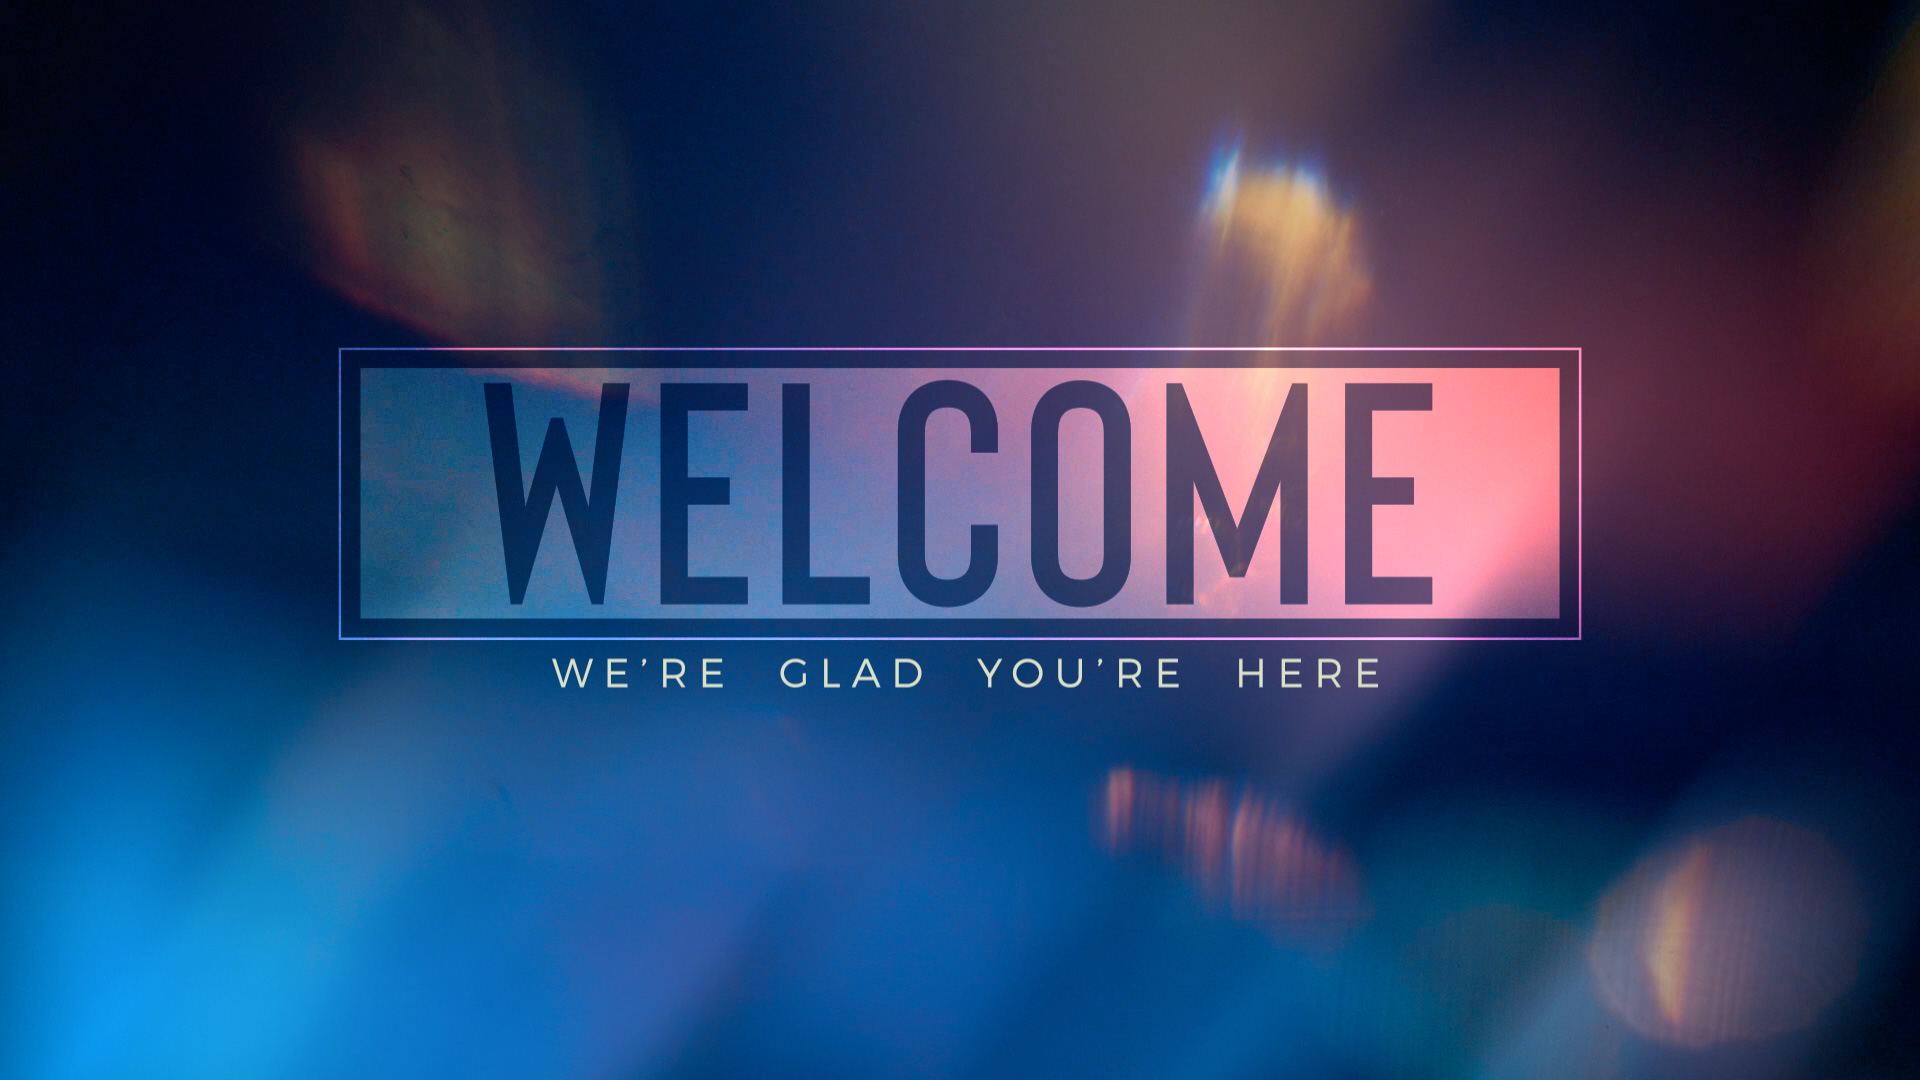 Welcome hd background wallpaper with light flashing pattern